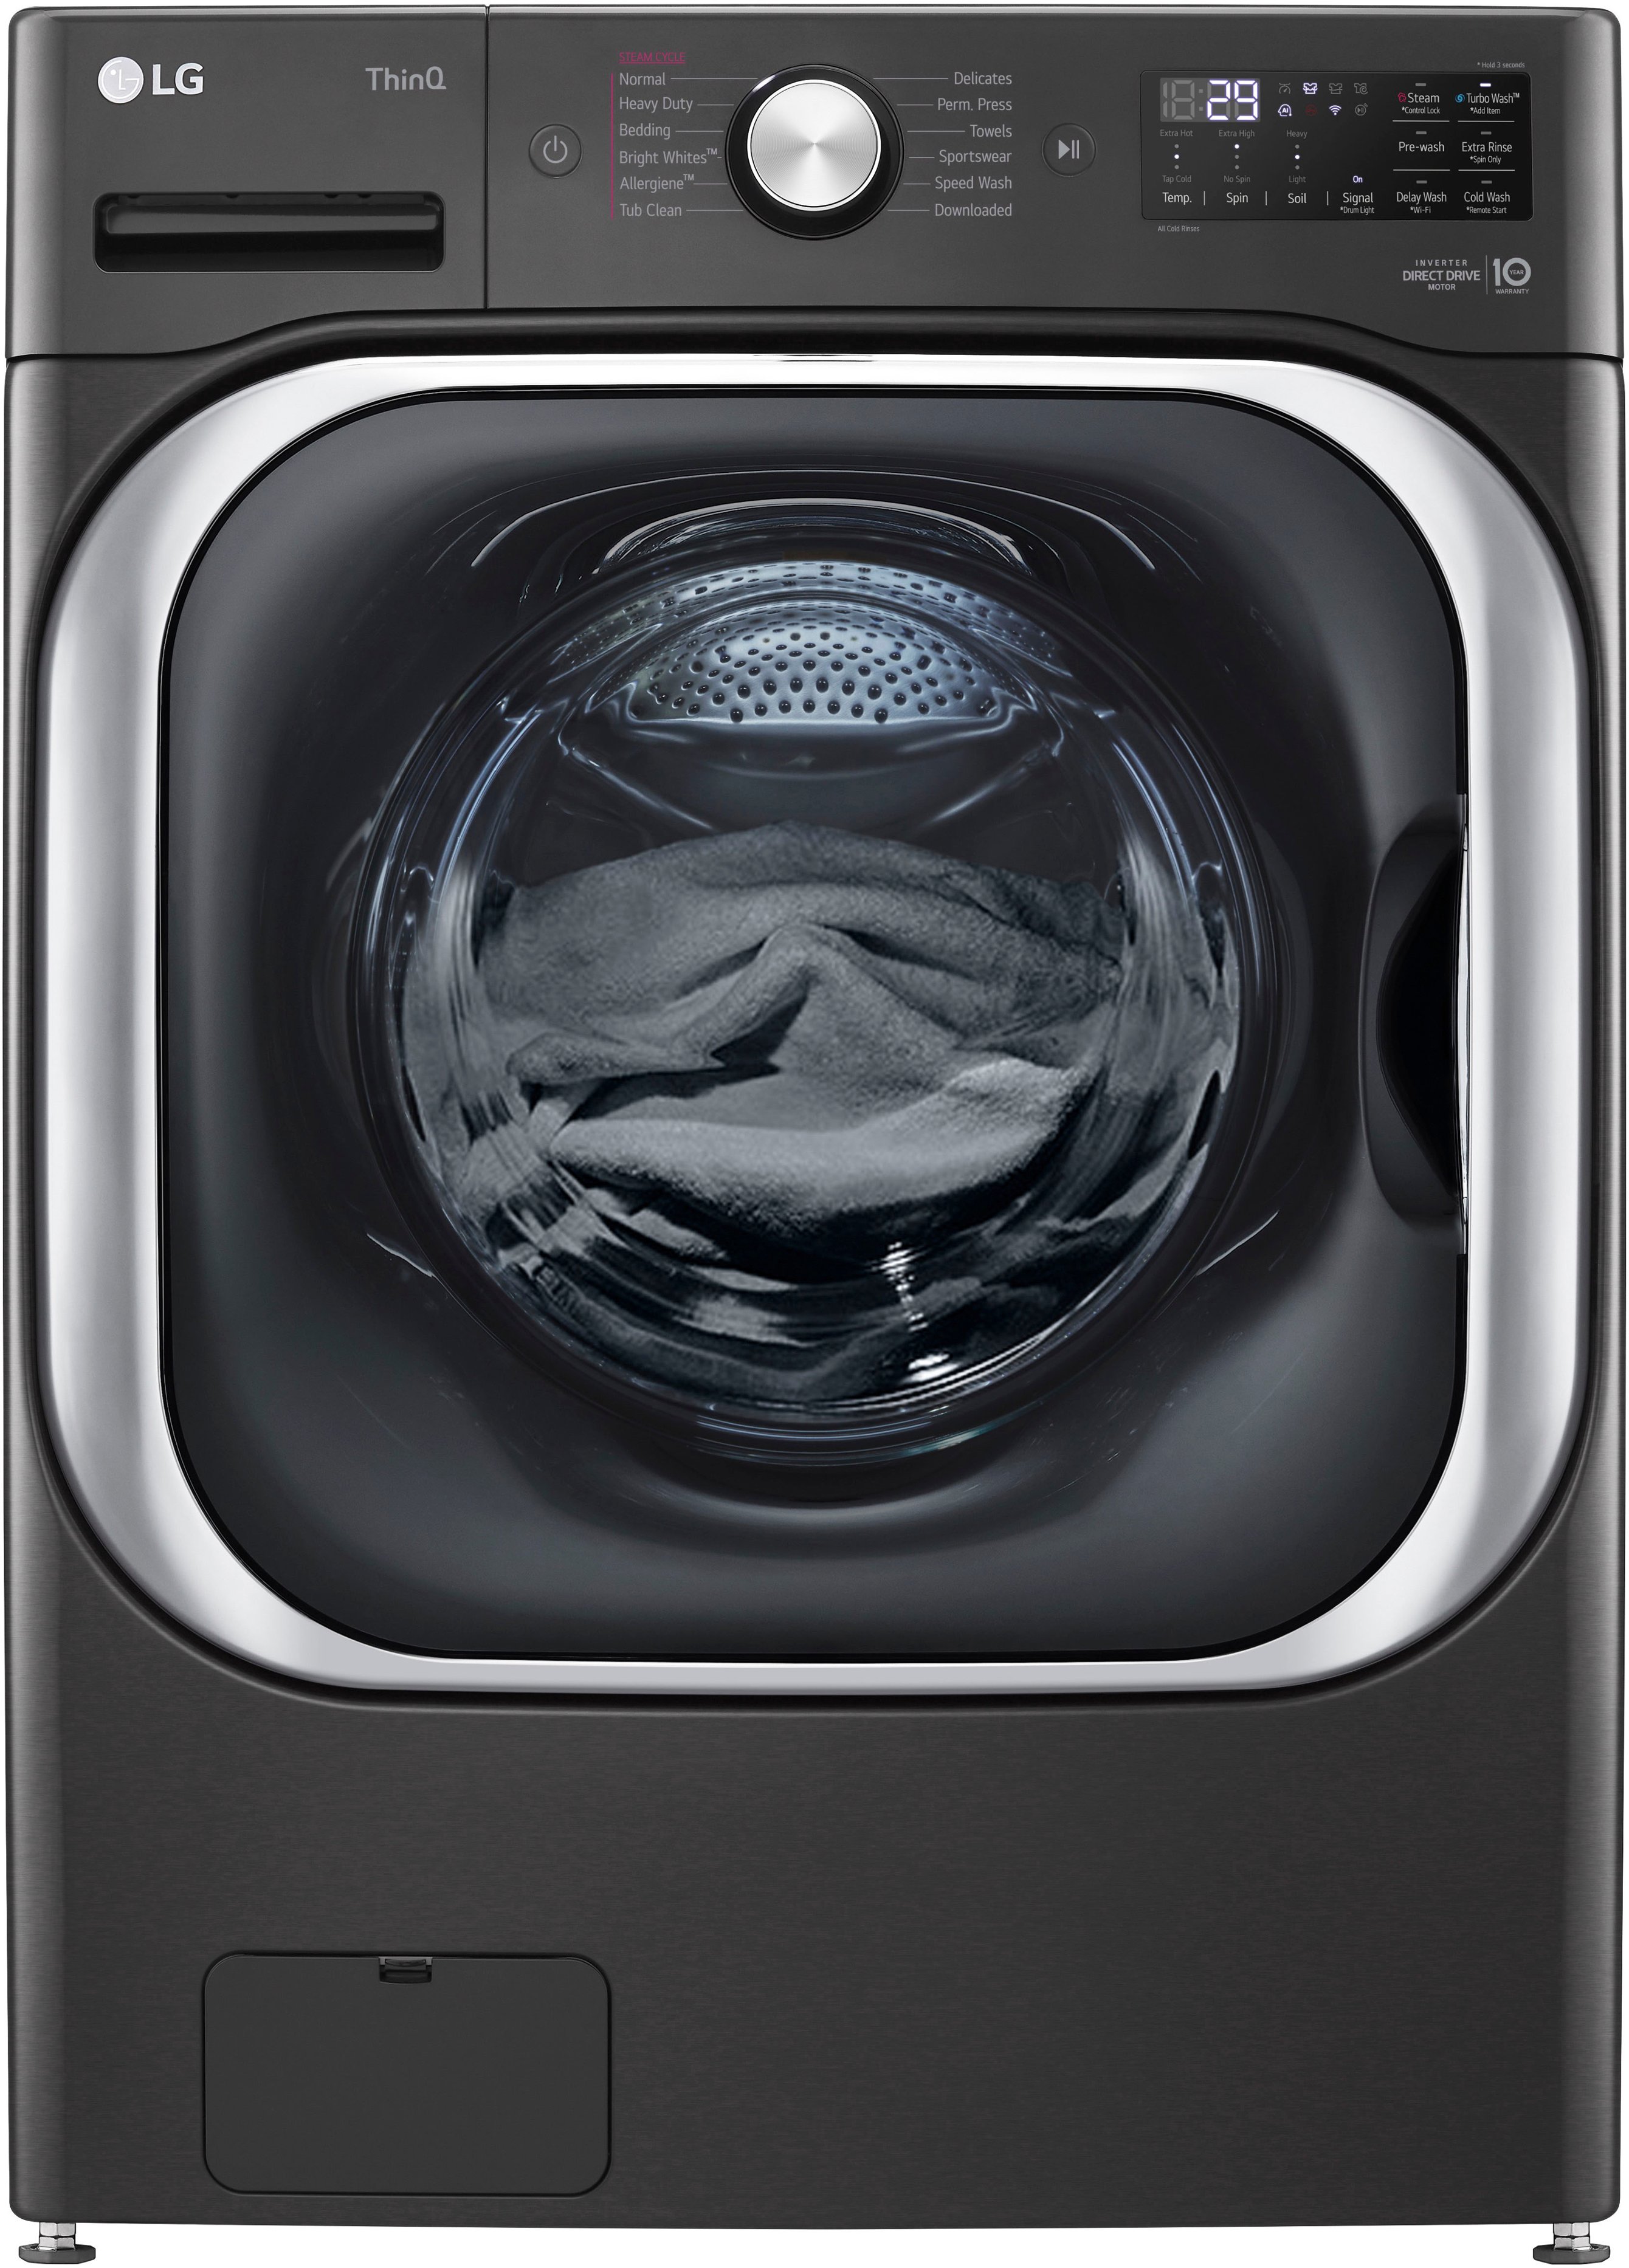 LG Top Load Washer] General Maintenance For An LG Top Load Washing Machine  